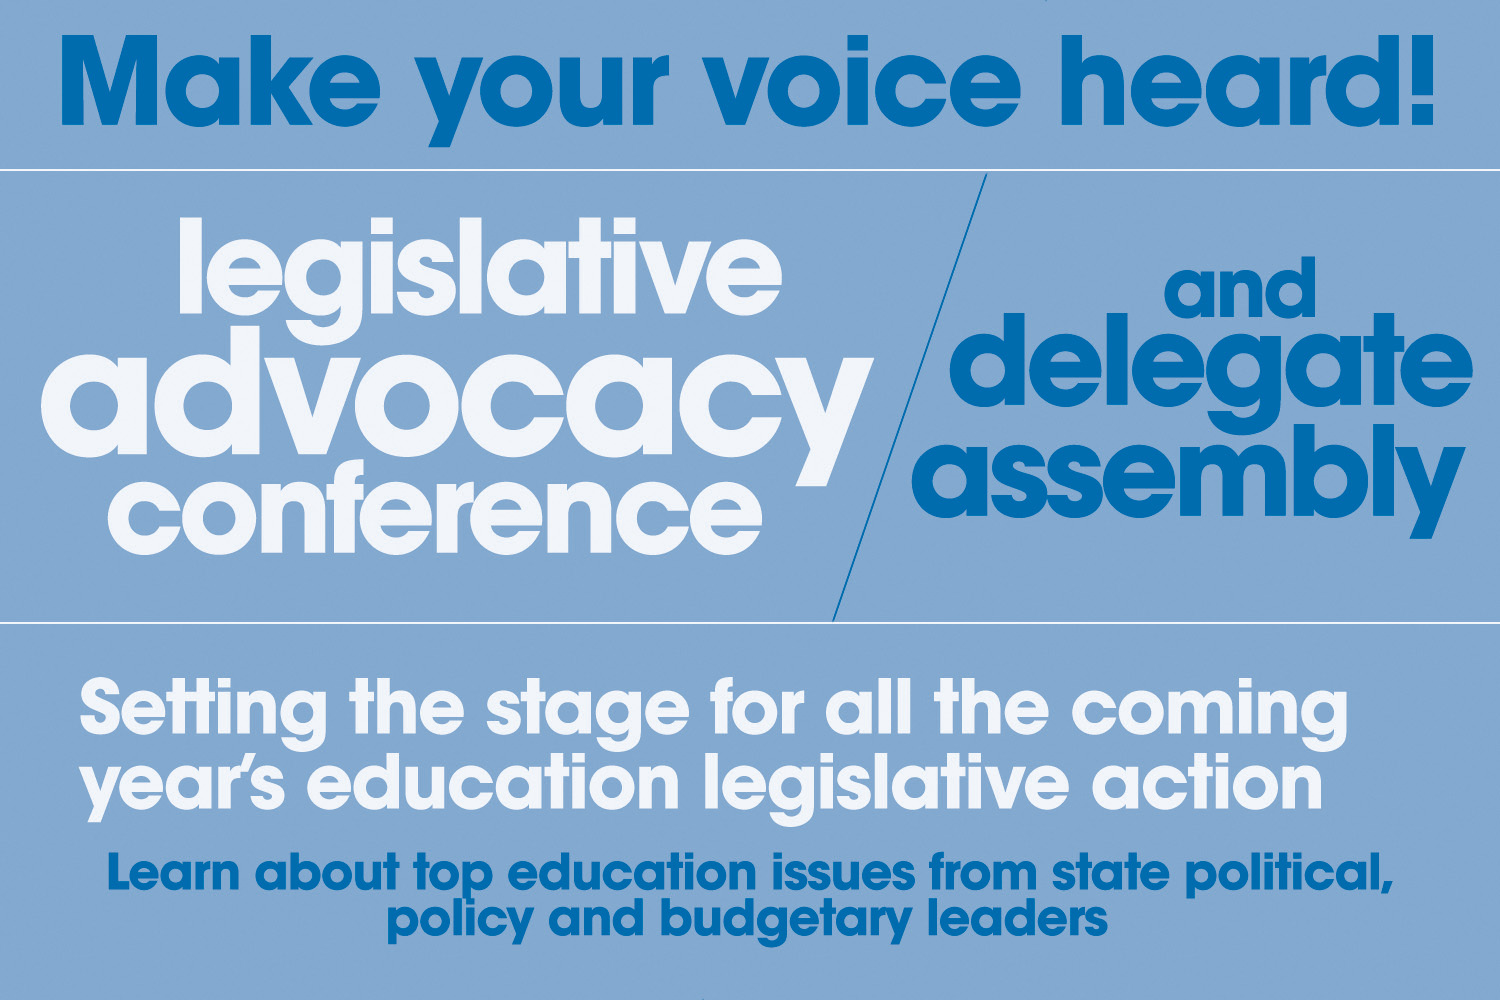 LEGISLATIVE ADVOCACY CONFERENCE AND DELEGATE ASSEMBLY